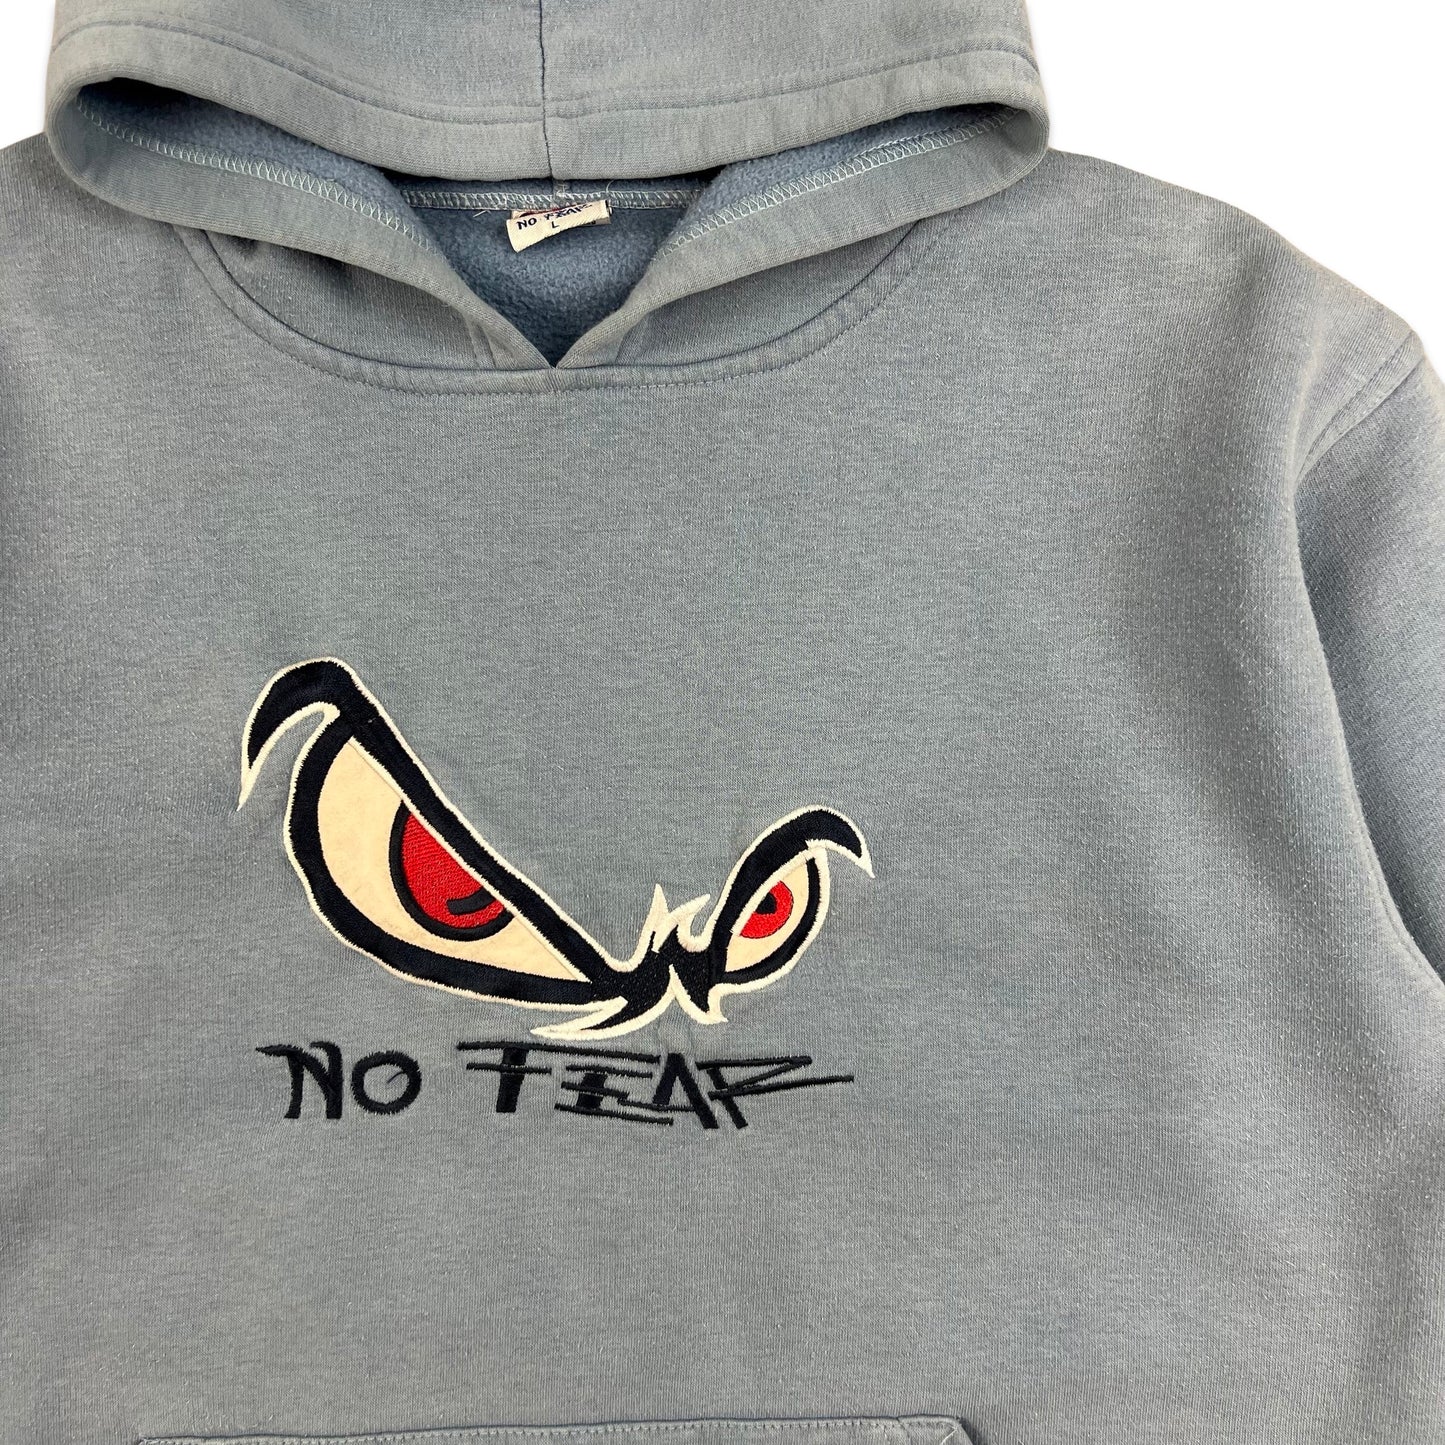 00s Vintage Blue No Fear Spellout Hoodie Black Red White Graphic S M L